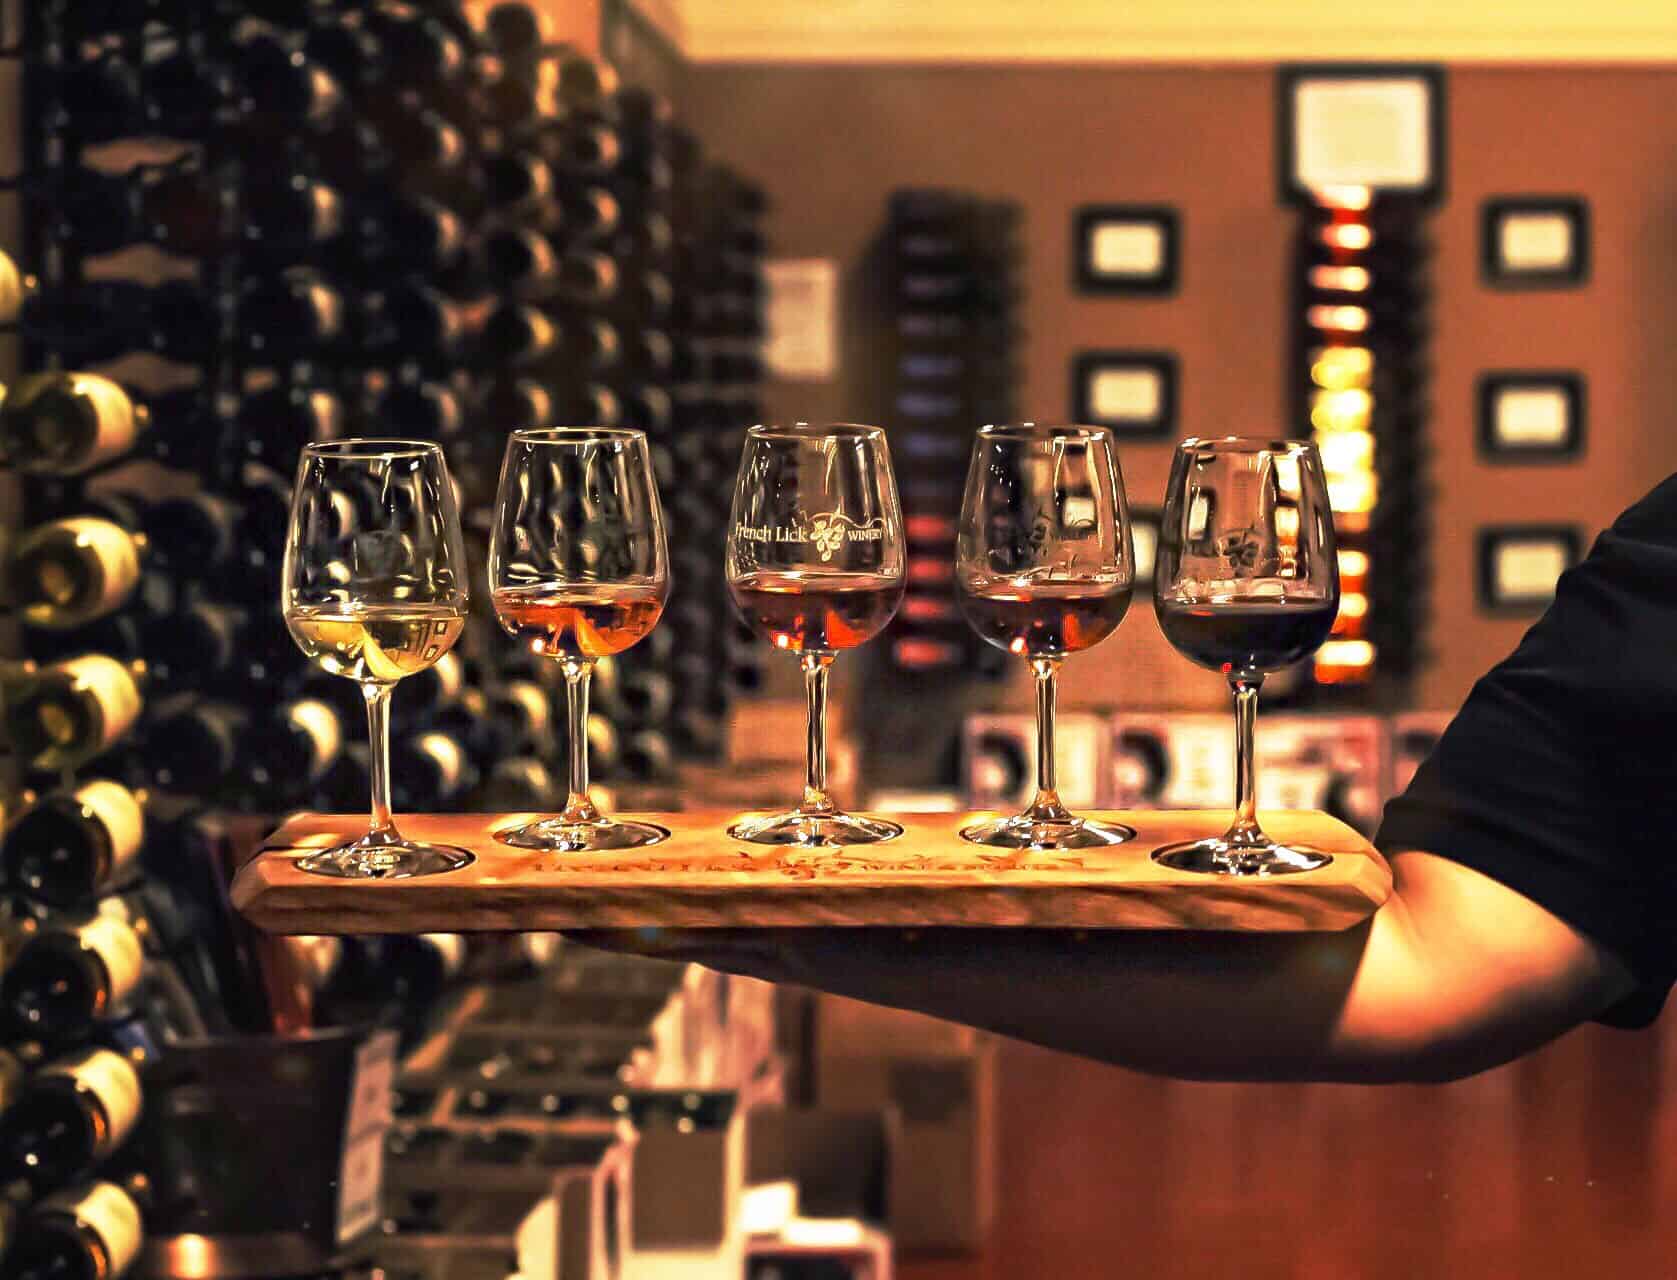 Best things to do in French Lick Indiana - Brandy Ream - Wine flight at French Lick Winery